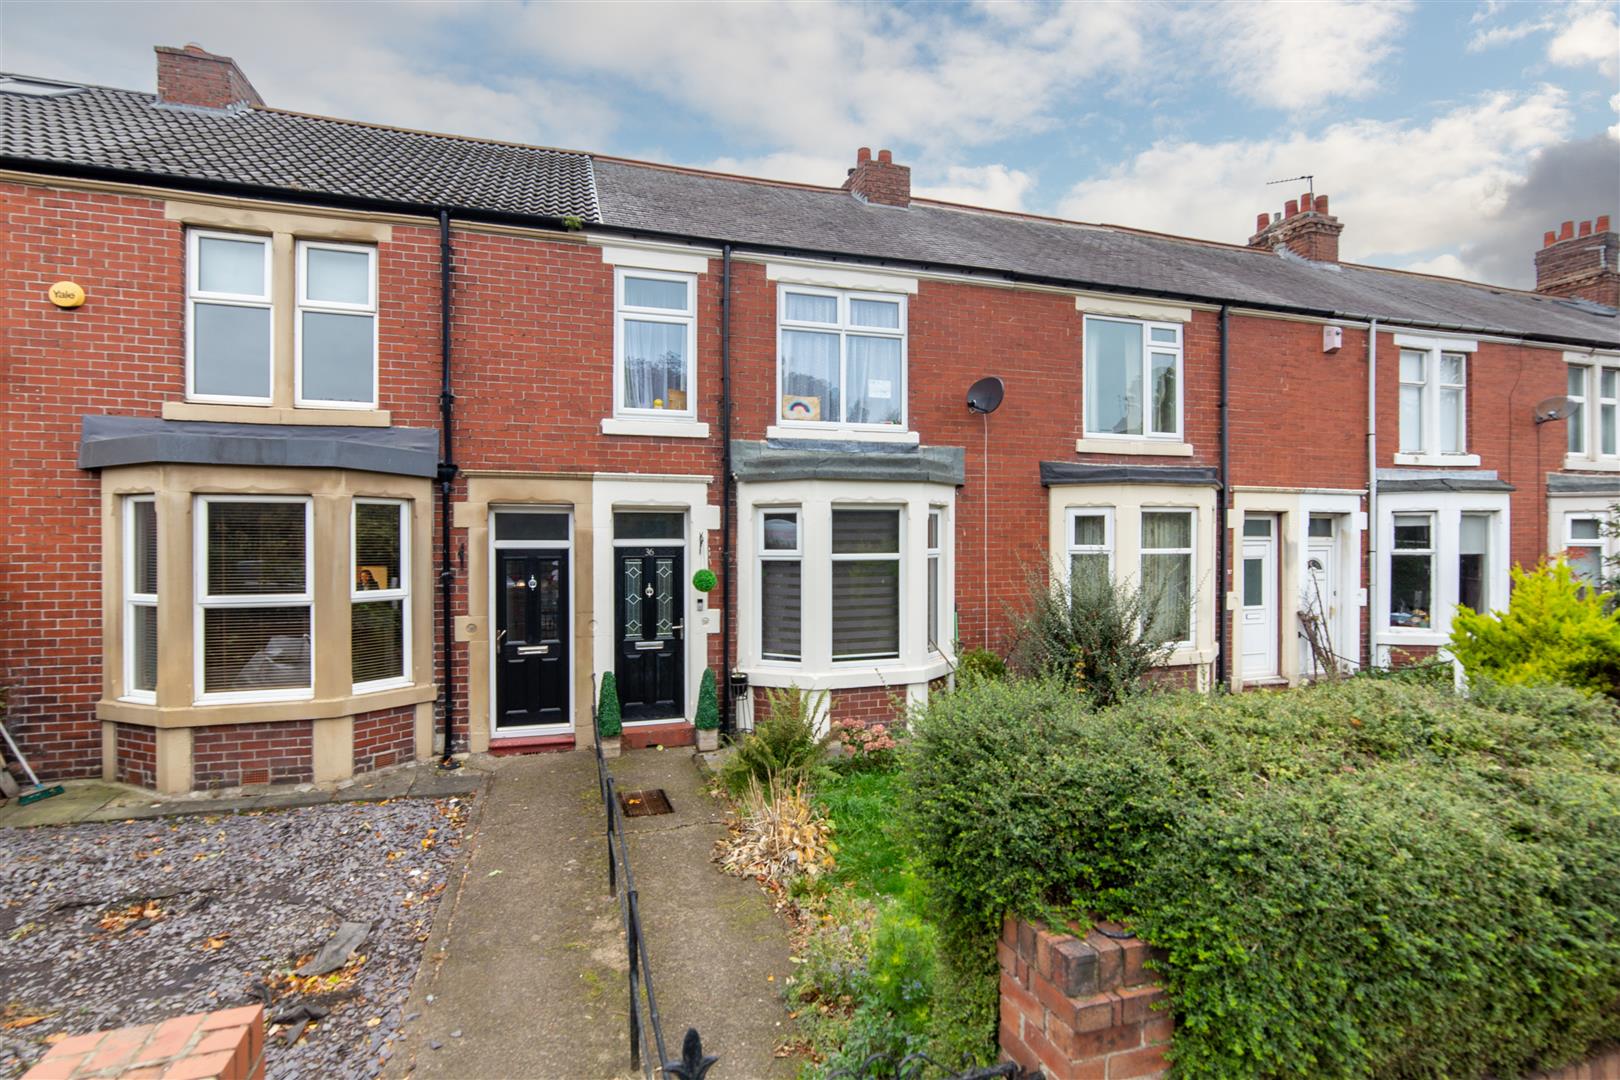 3 bed terraced house for sale in Park View, Newcastle Upon Tyne - Property Image 1